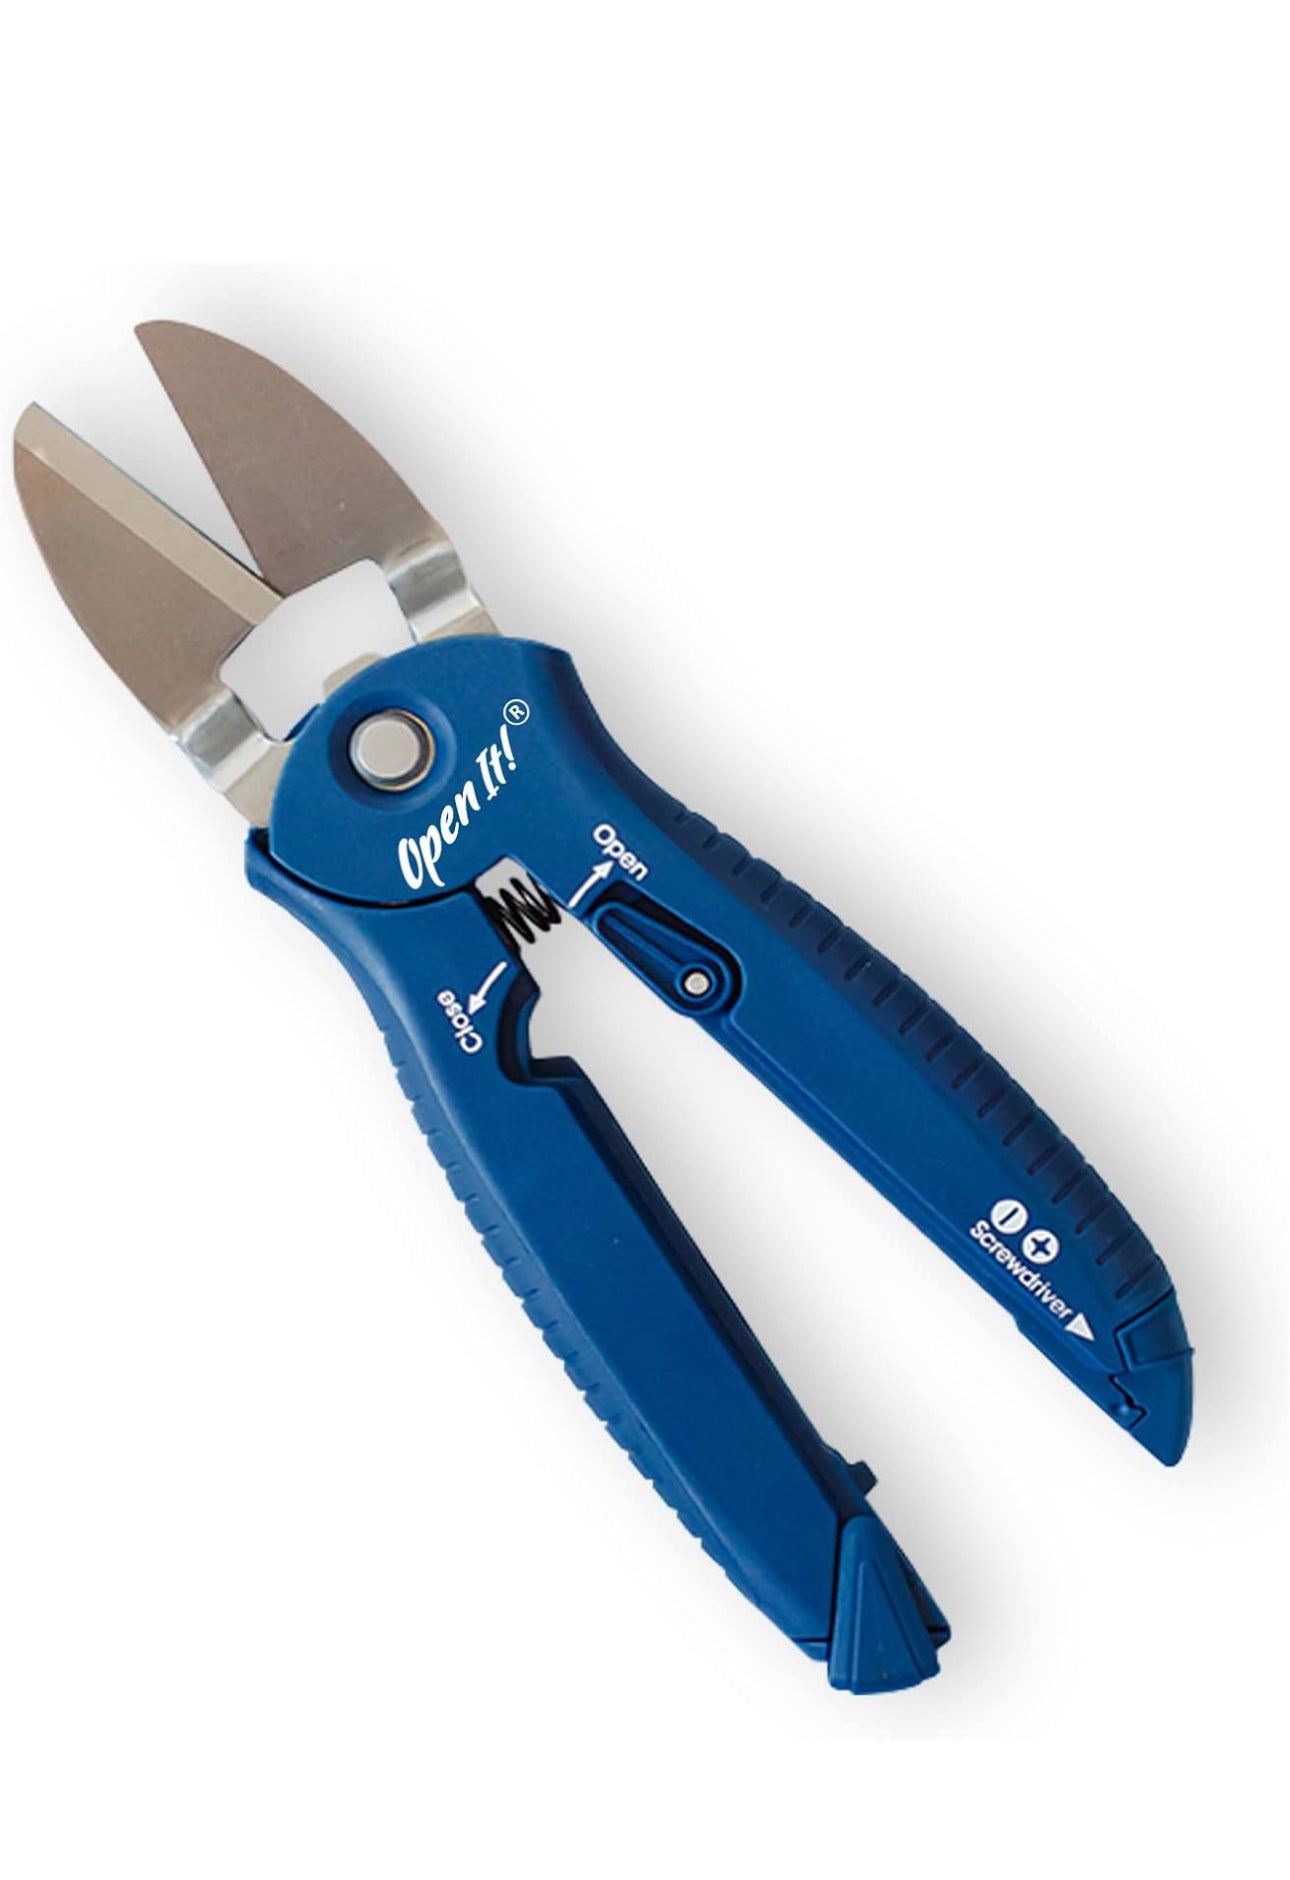 Zibra Open-It! All-In-One Multi Tool with Heavy-Duty Scissors, Box Cutter,  Screwdriver, and Package Opener, Blue